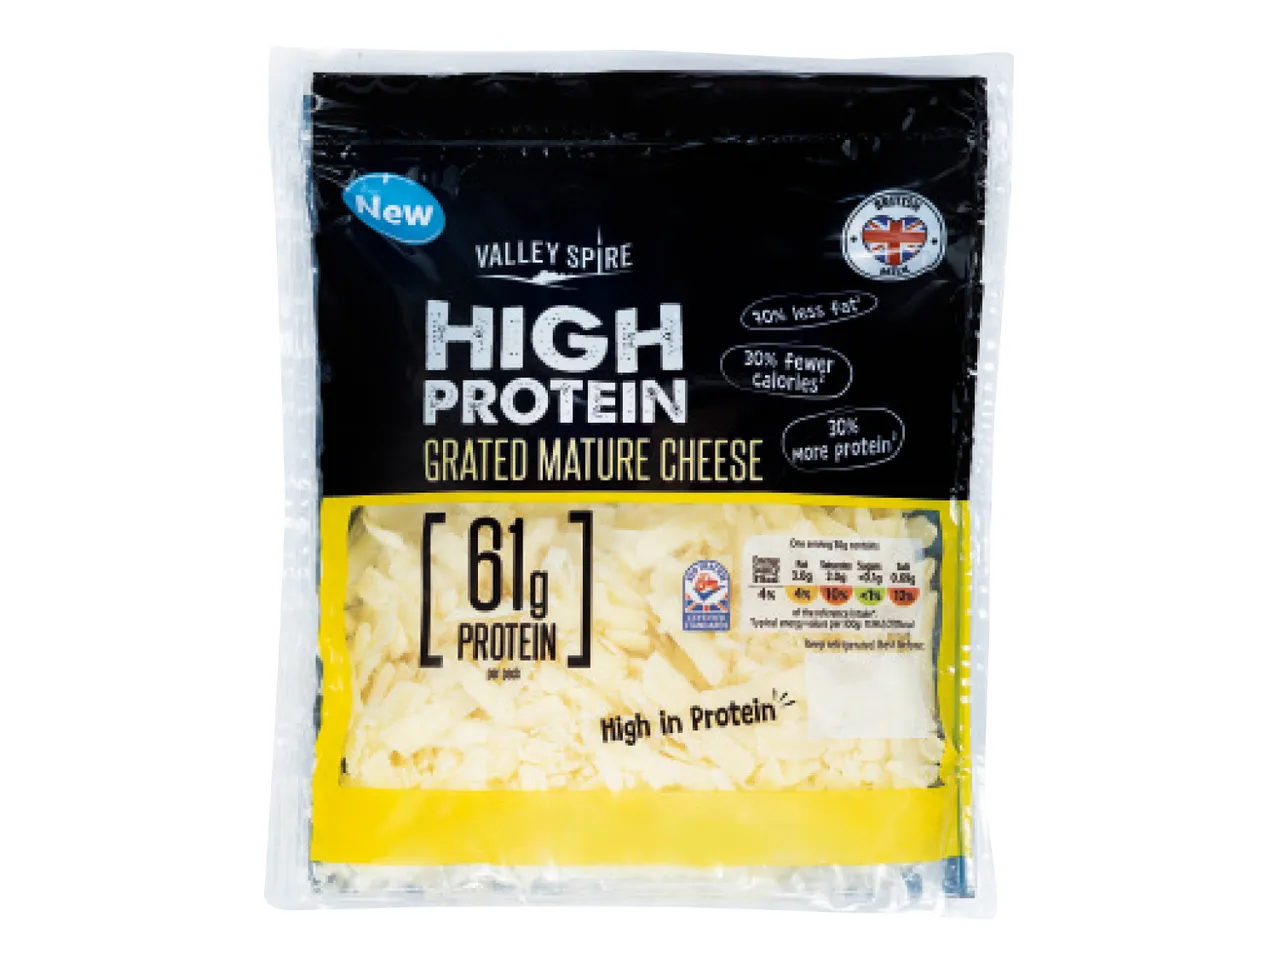 Go to full screen view: Valley Spire High Protein Mature Cheddar - Image 2